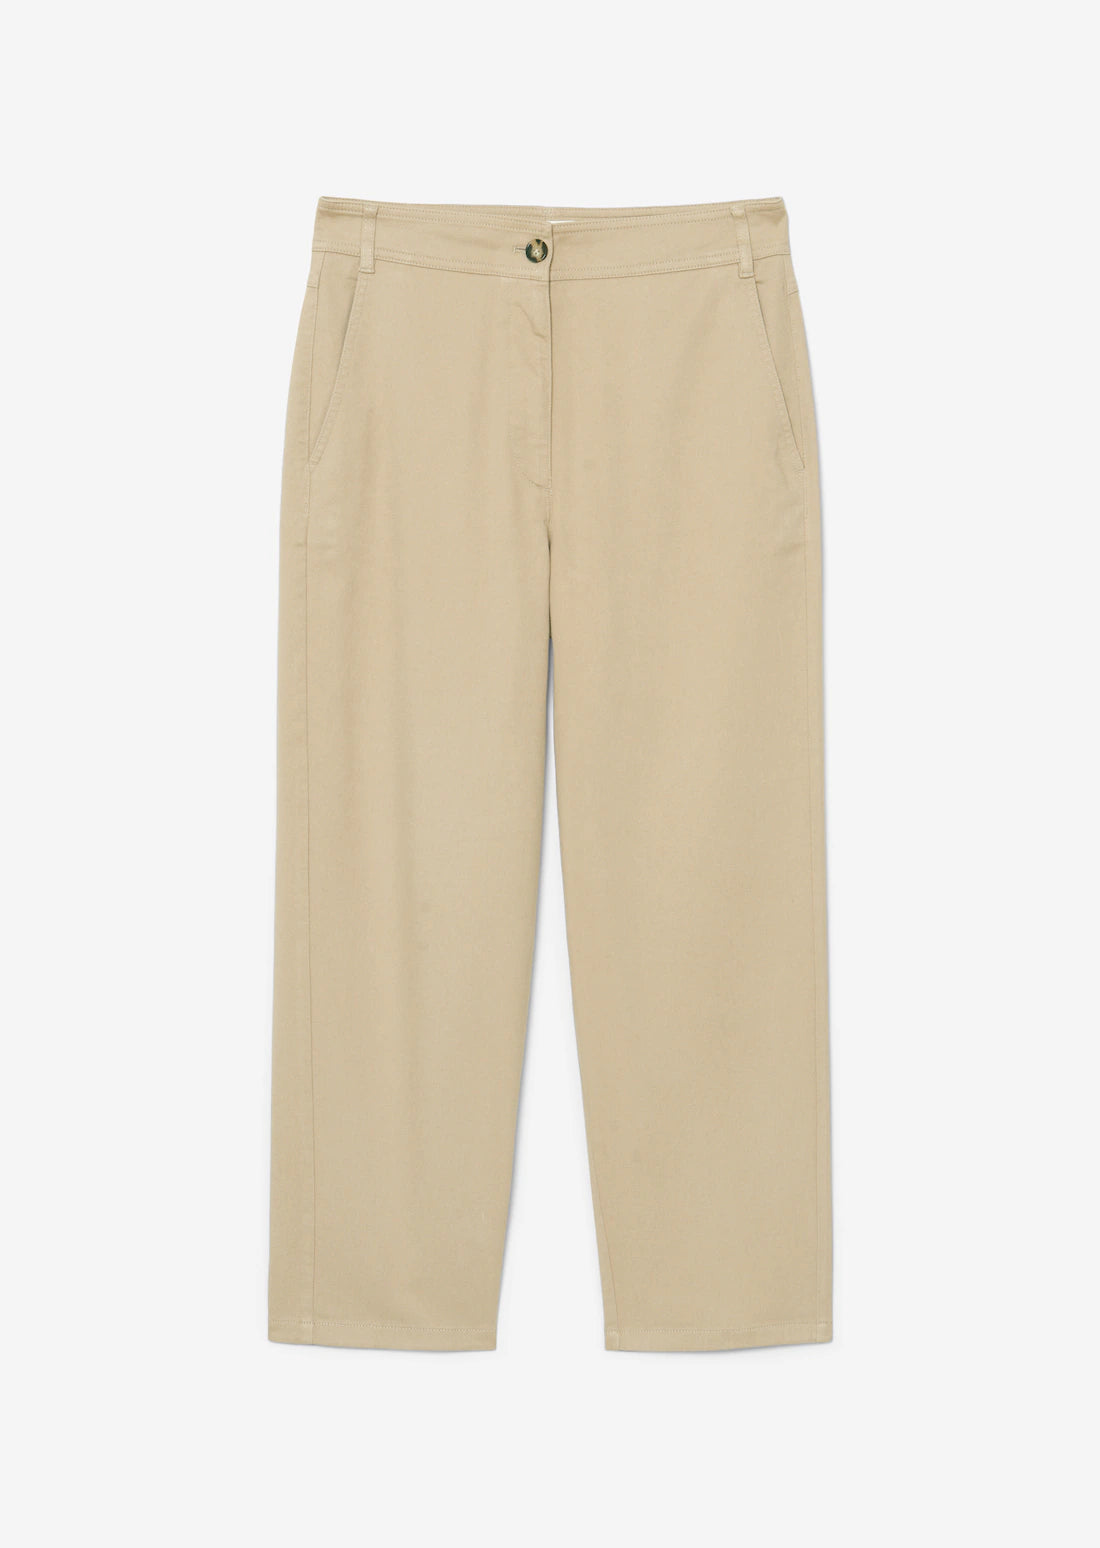 Wide Ankle Length Trouser in Loose Sand